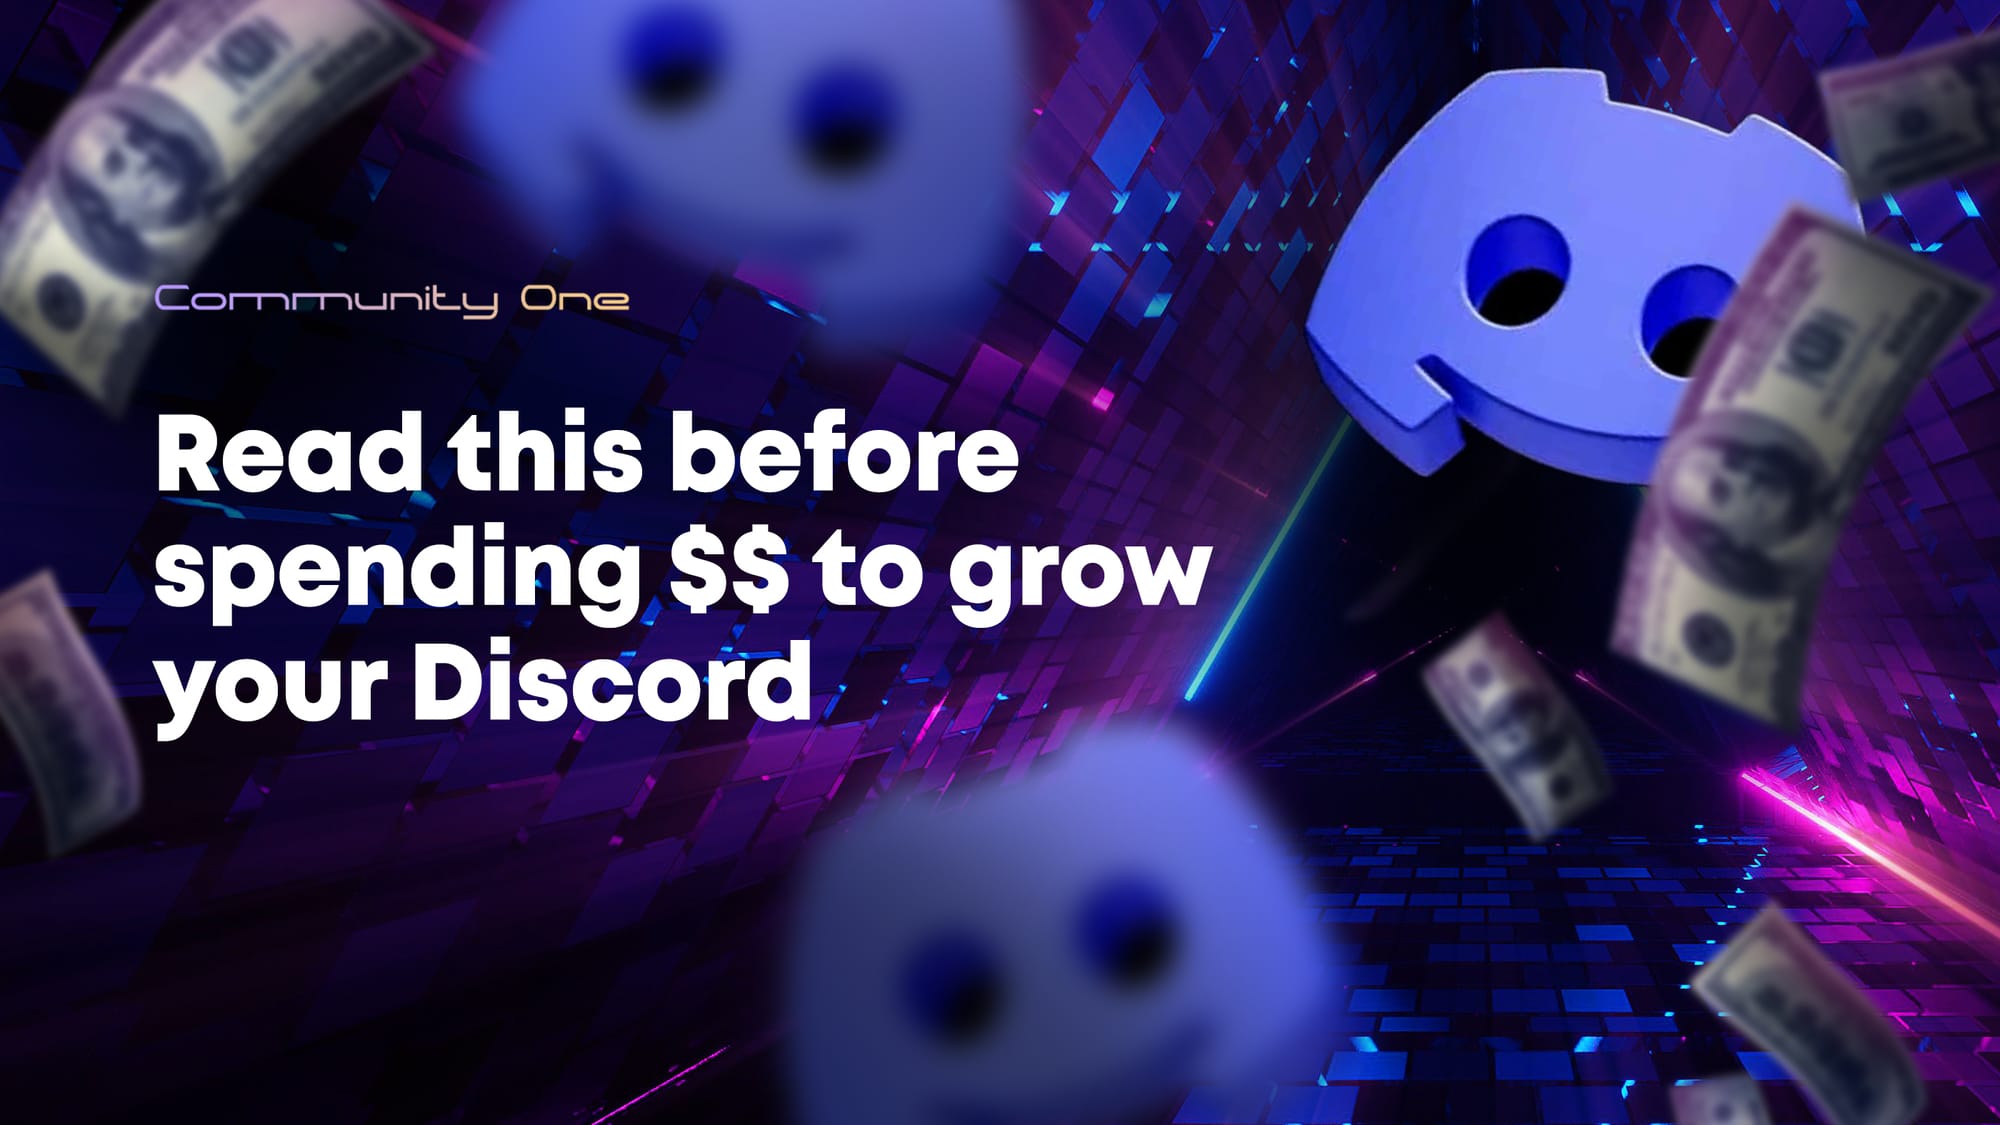 Should You Spend Money to Grow Your Discord? Exploring Paid Advertising on Discord Listing Sites